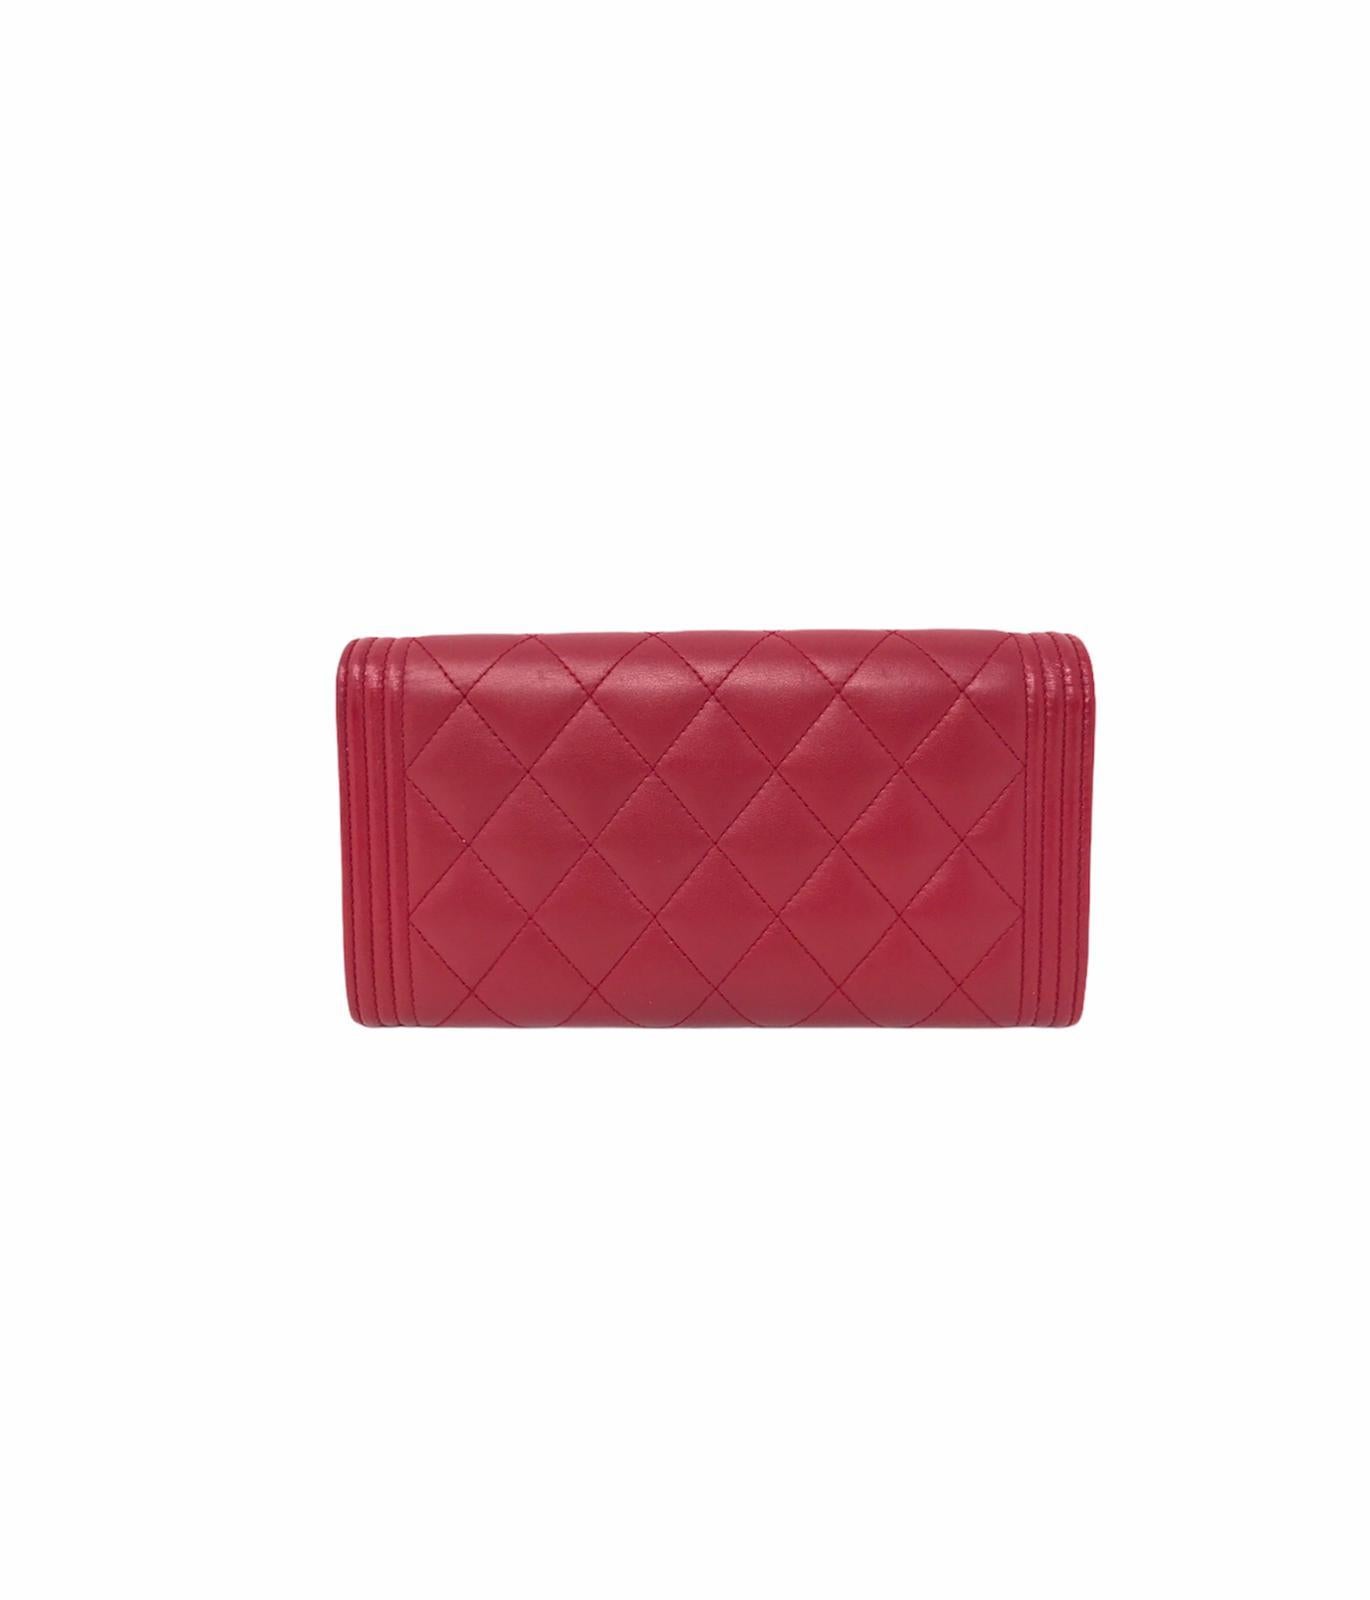 Large Chanel wallet boy model in smooth lambskin burgundy color closure with metal cc logo Good condition, slight signs of wear on the galvanic and on the leather year of production 2018 no internal card holder and coin pocket with zip dimensions 20